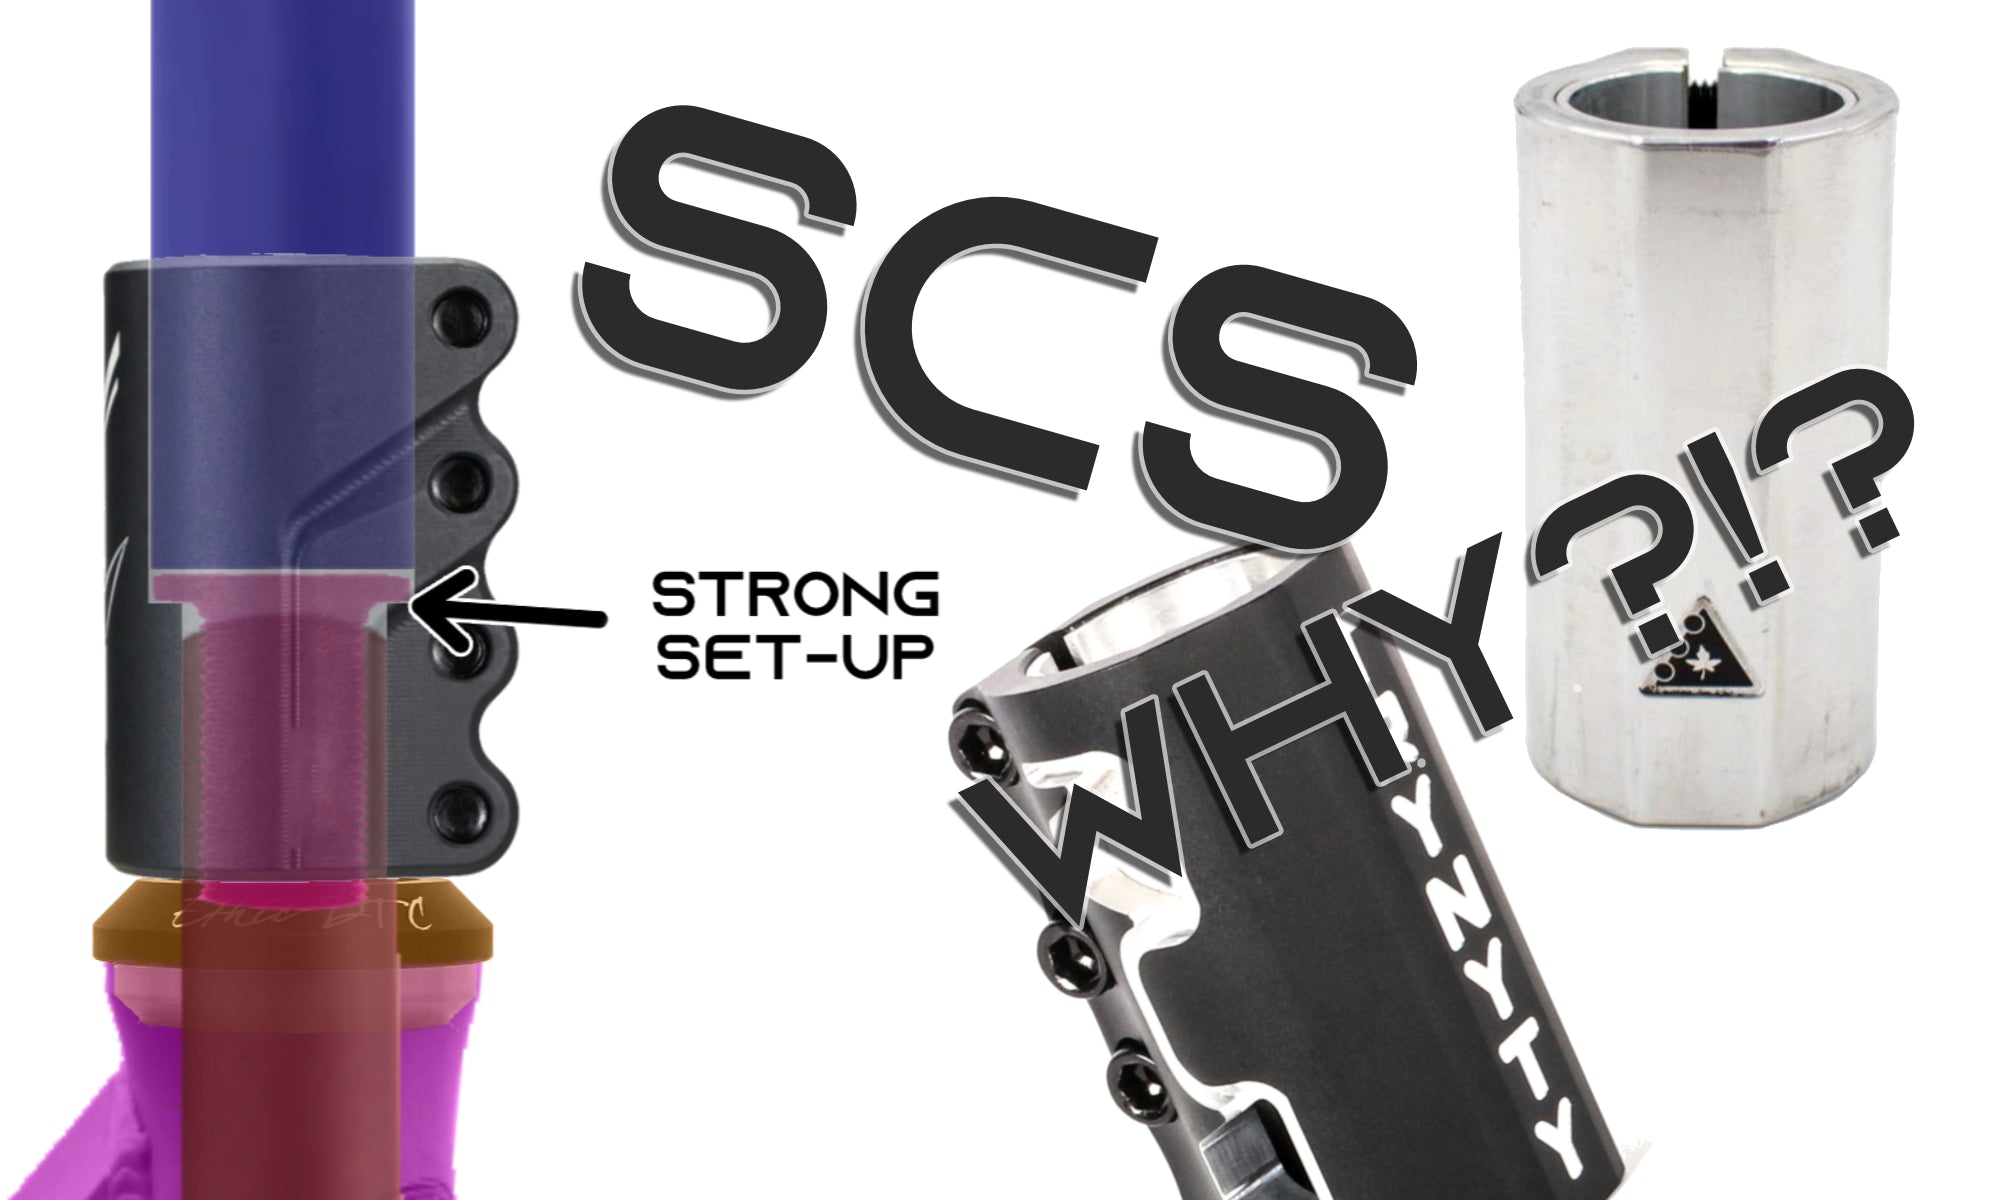 How To Use An SCS Clamp